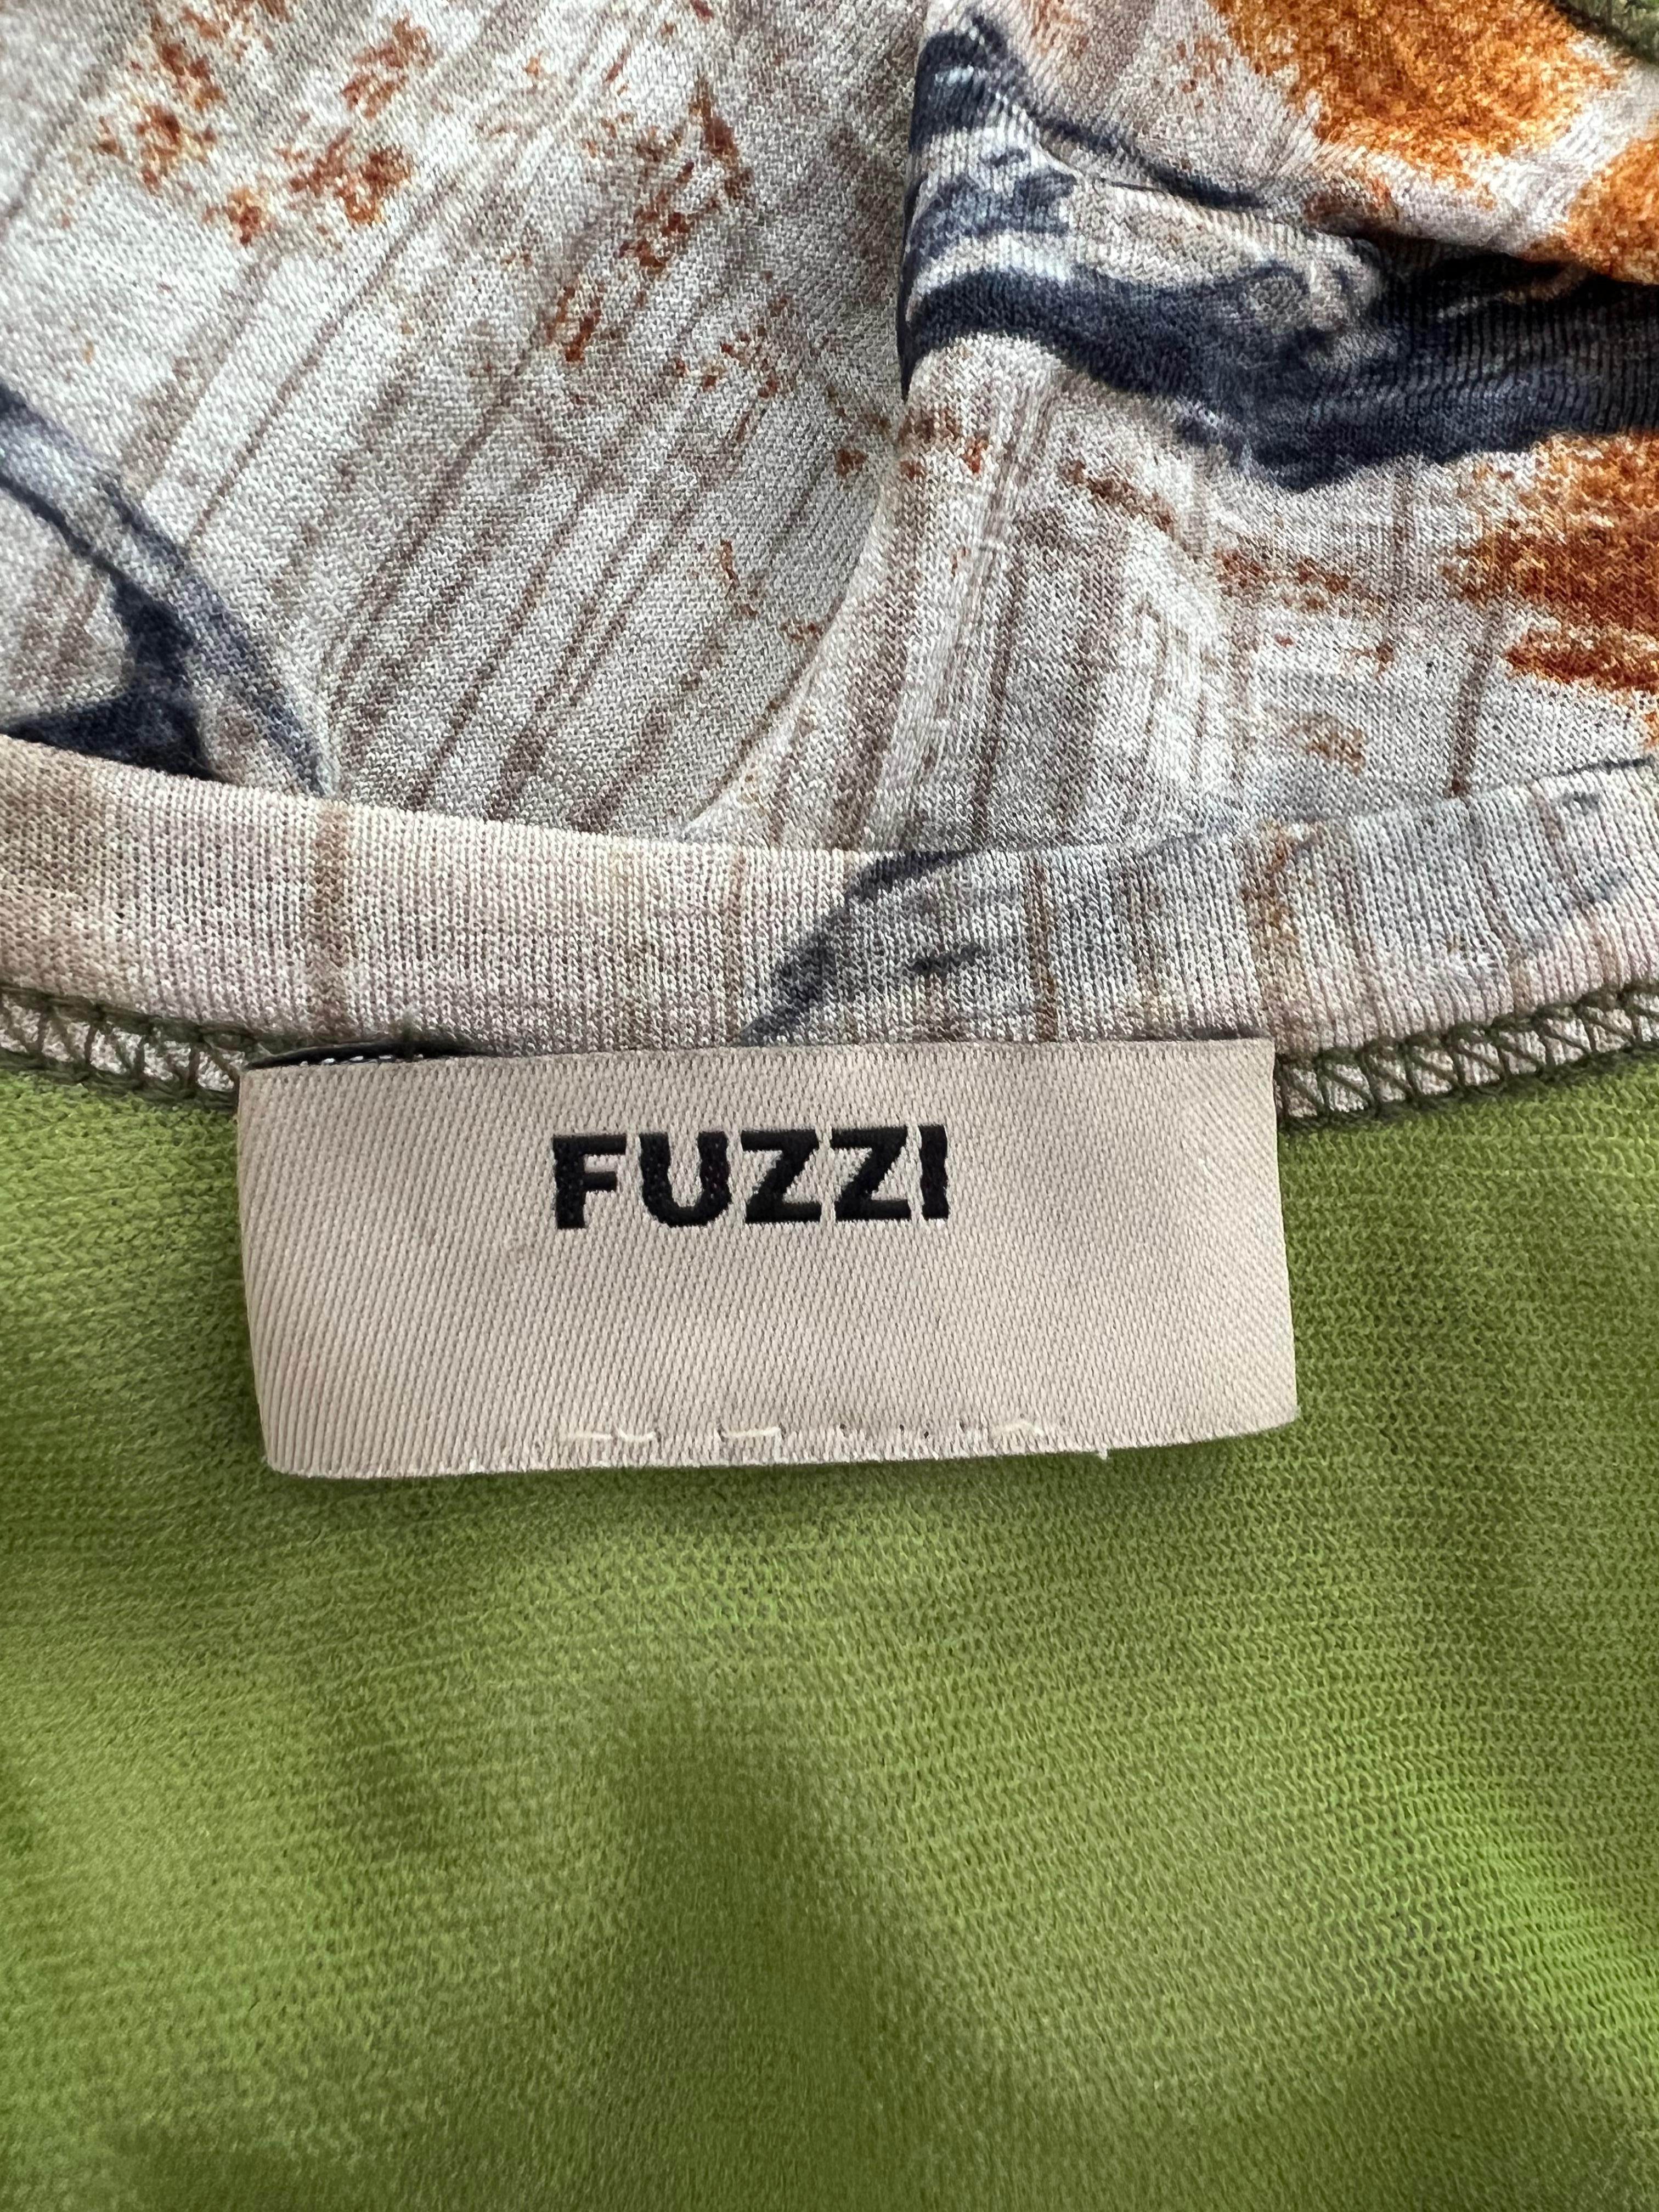 Fuzzi Multicolored Cardigan and Top Set For Sale 12